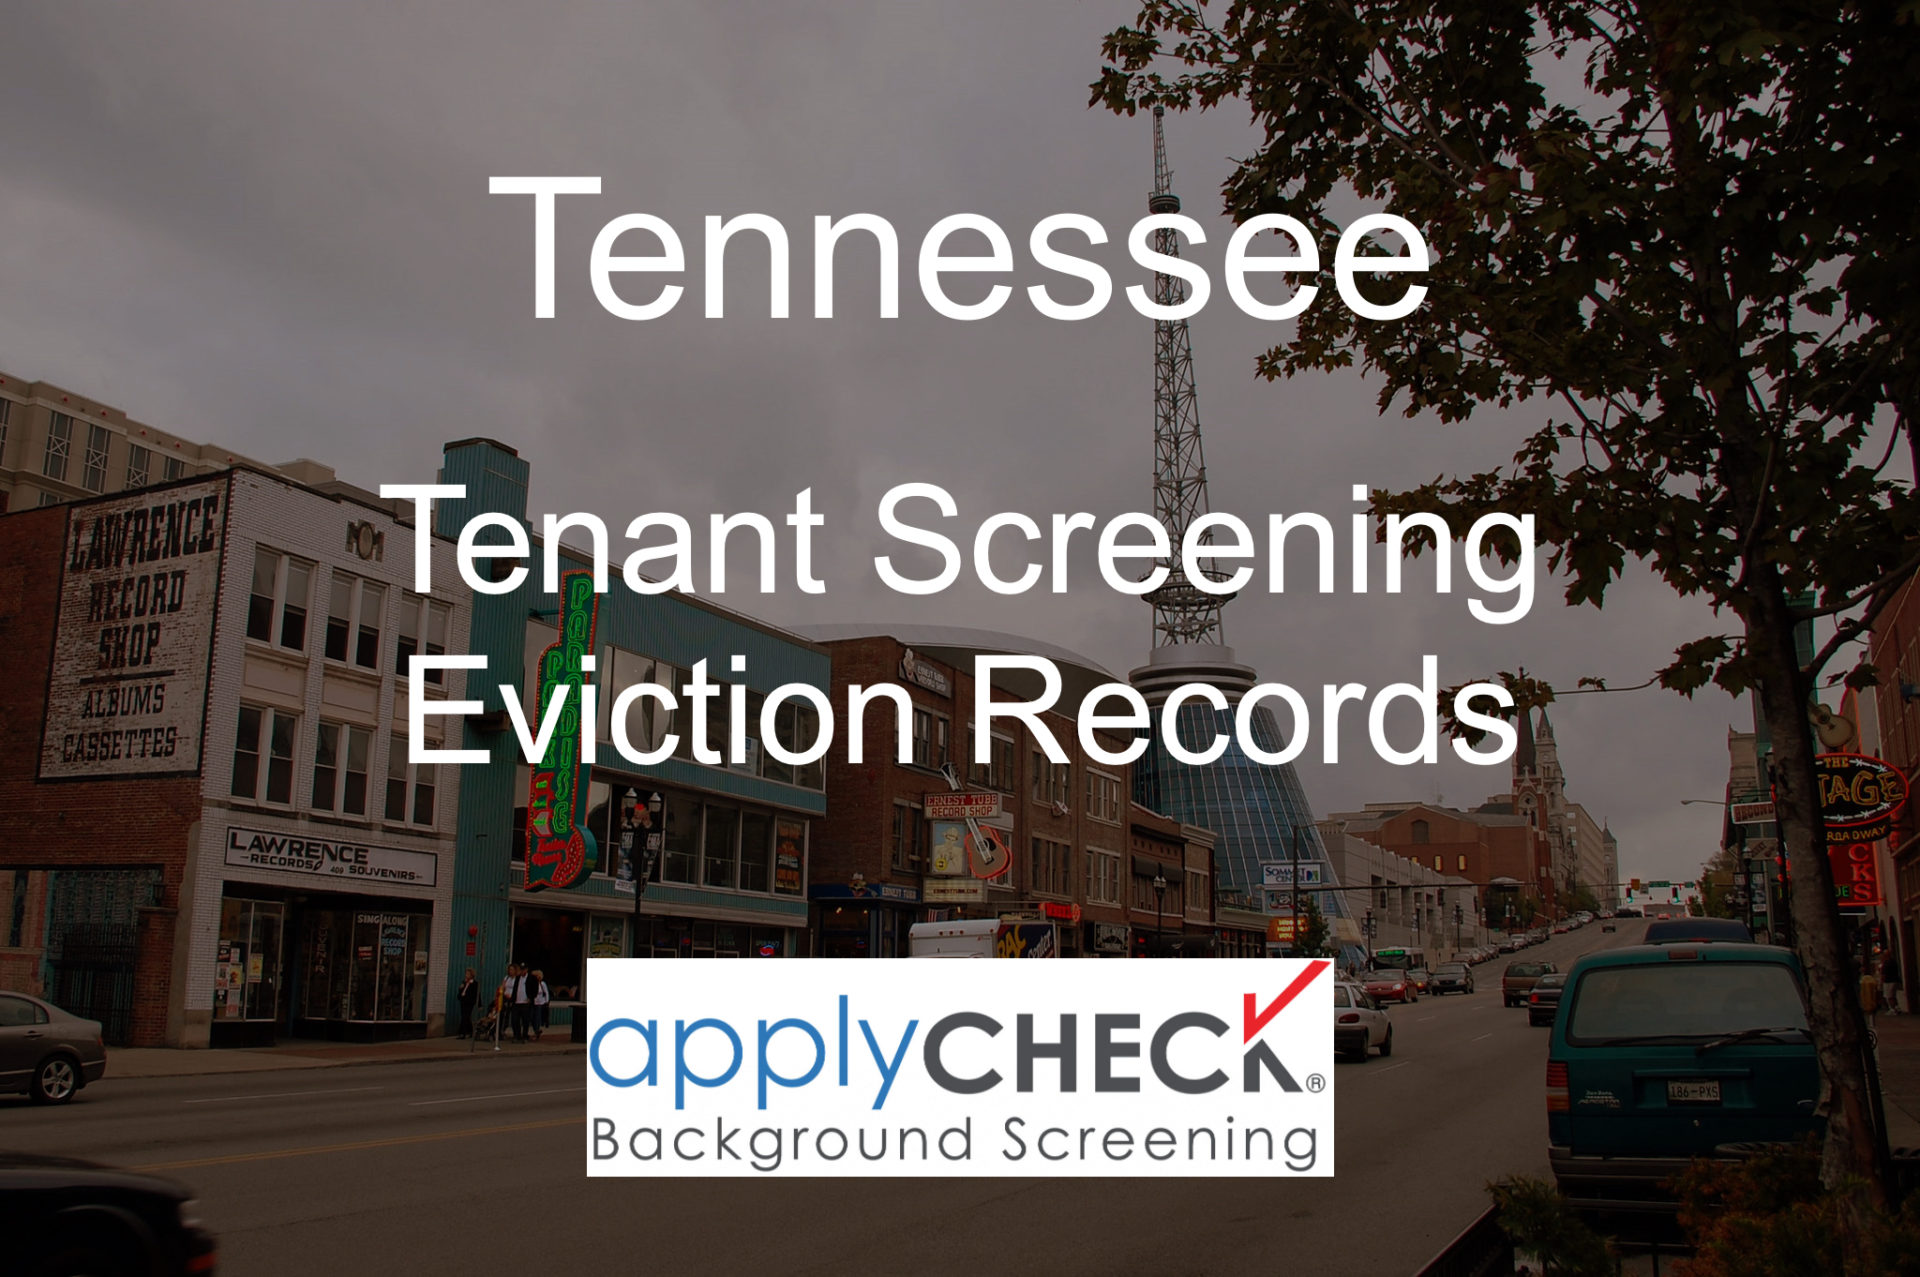 tennessee tenant screening eviction image